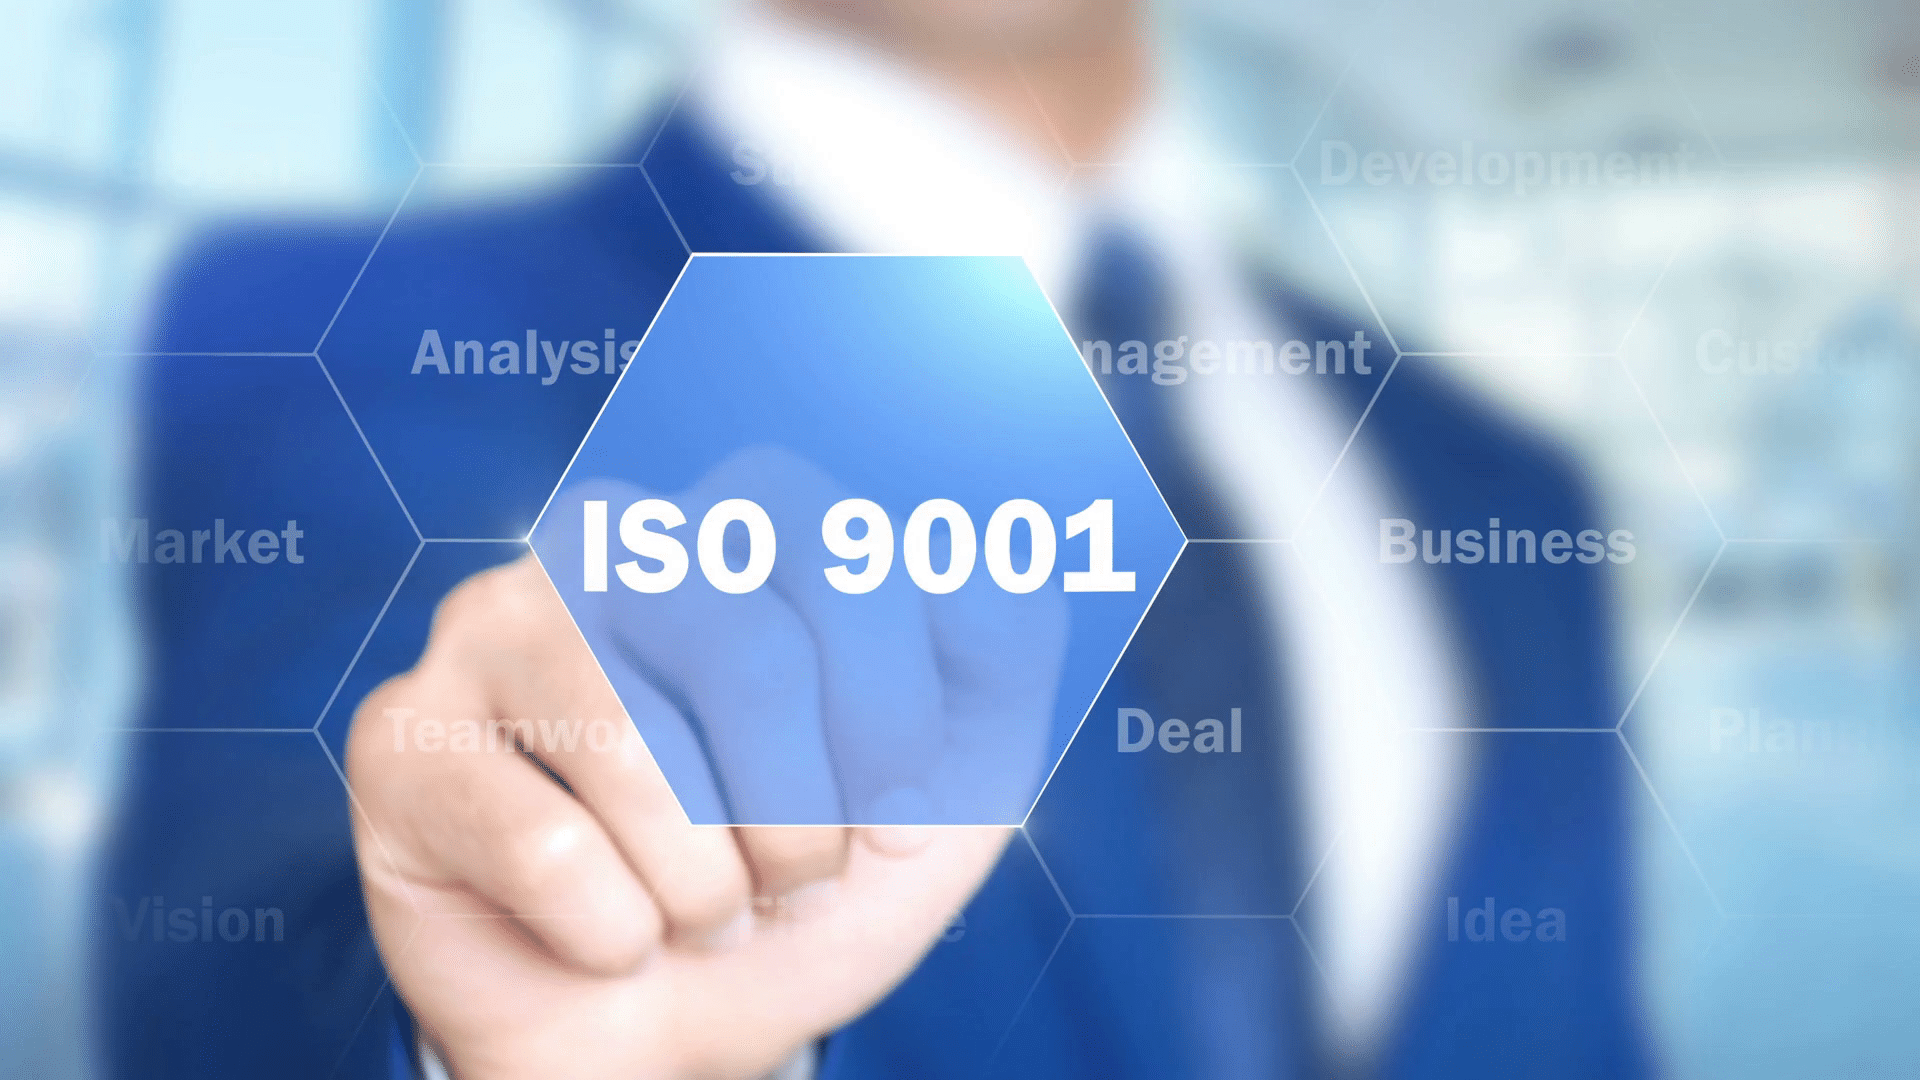 where to get the iso 9001 Standard?